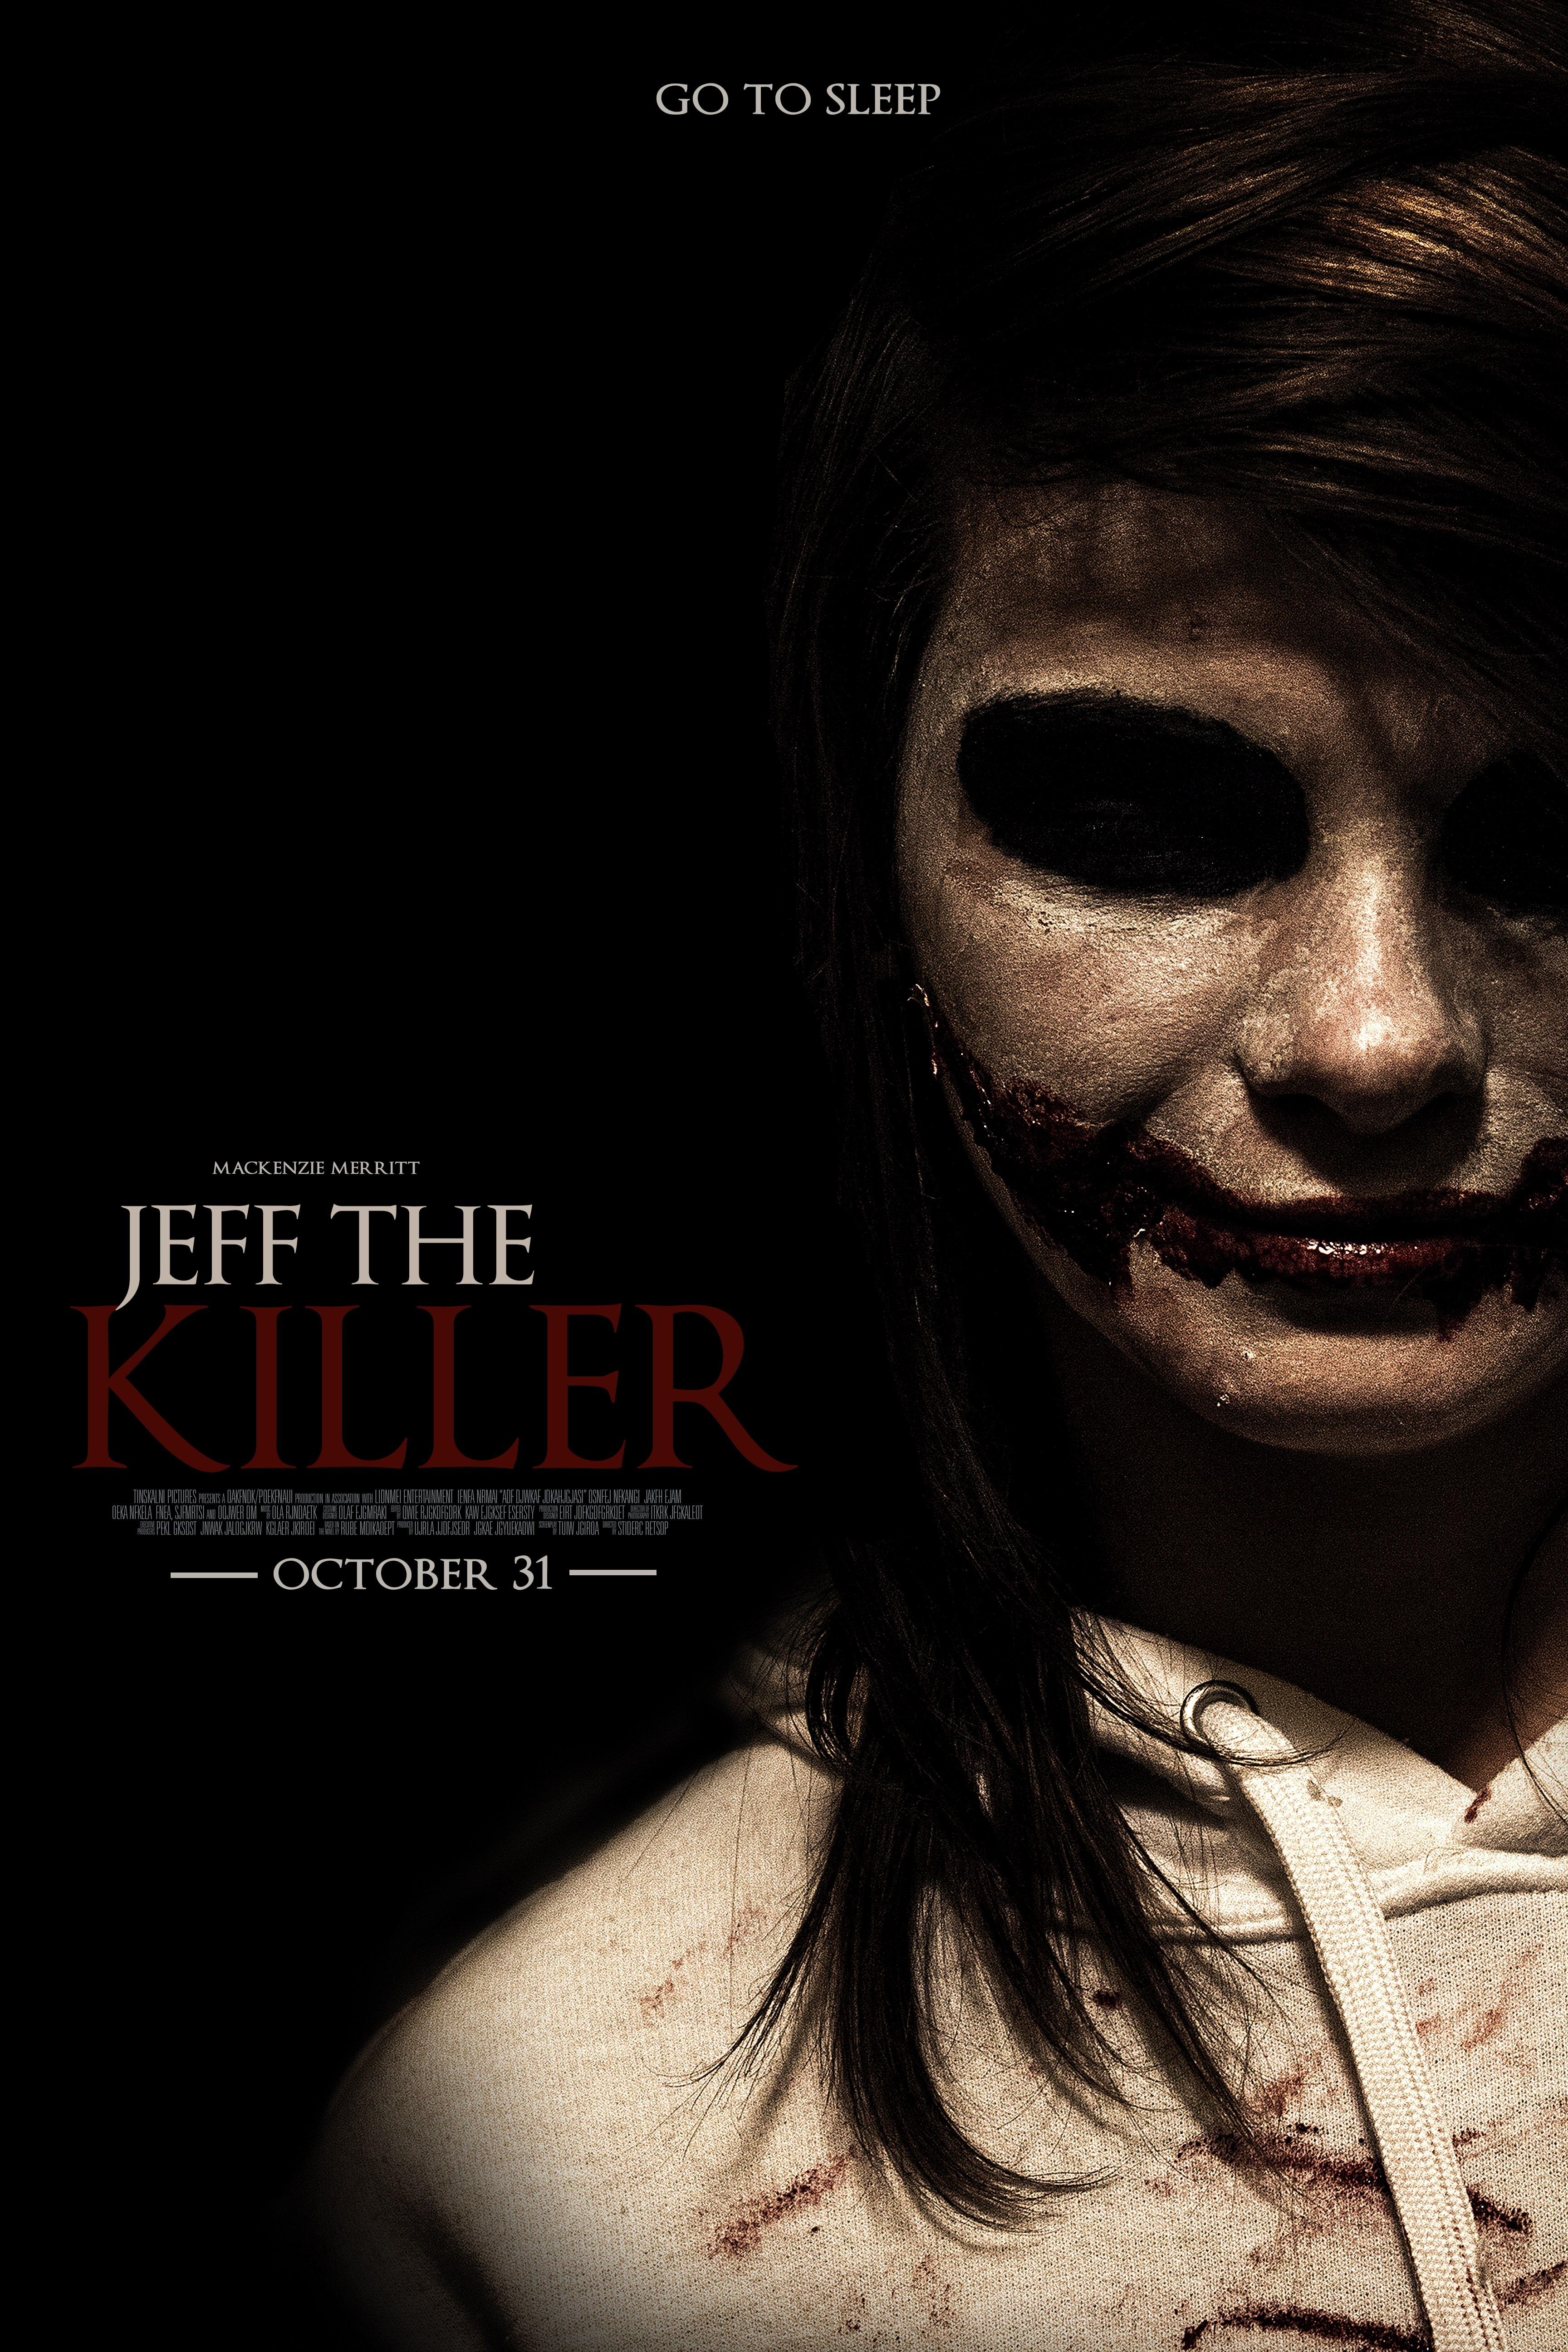 What If Jeff The Killer Movie Was A Horror 2000s? Fan Casting on